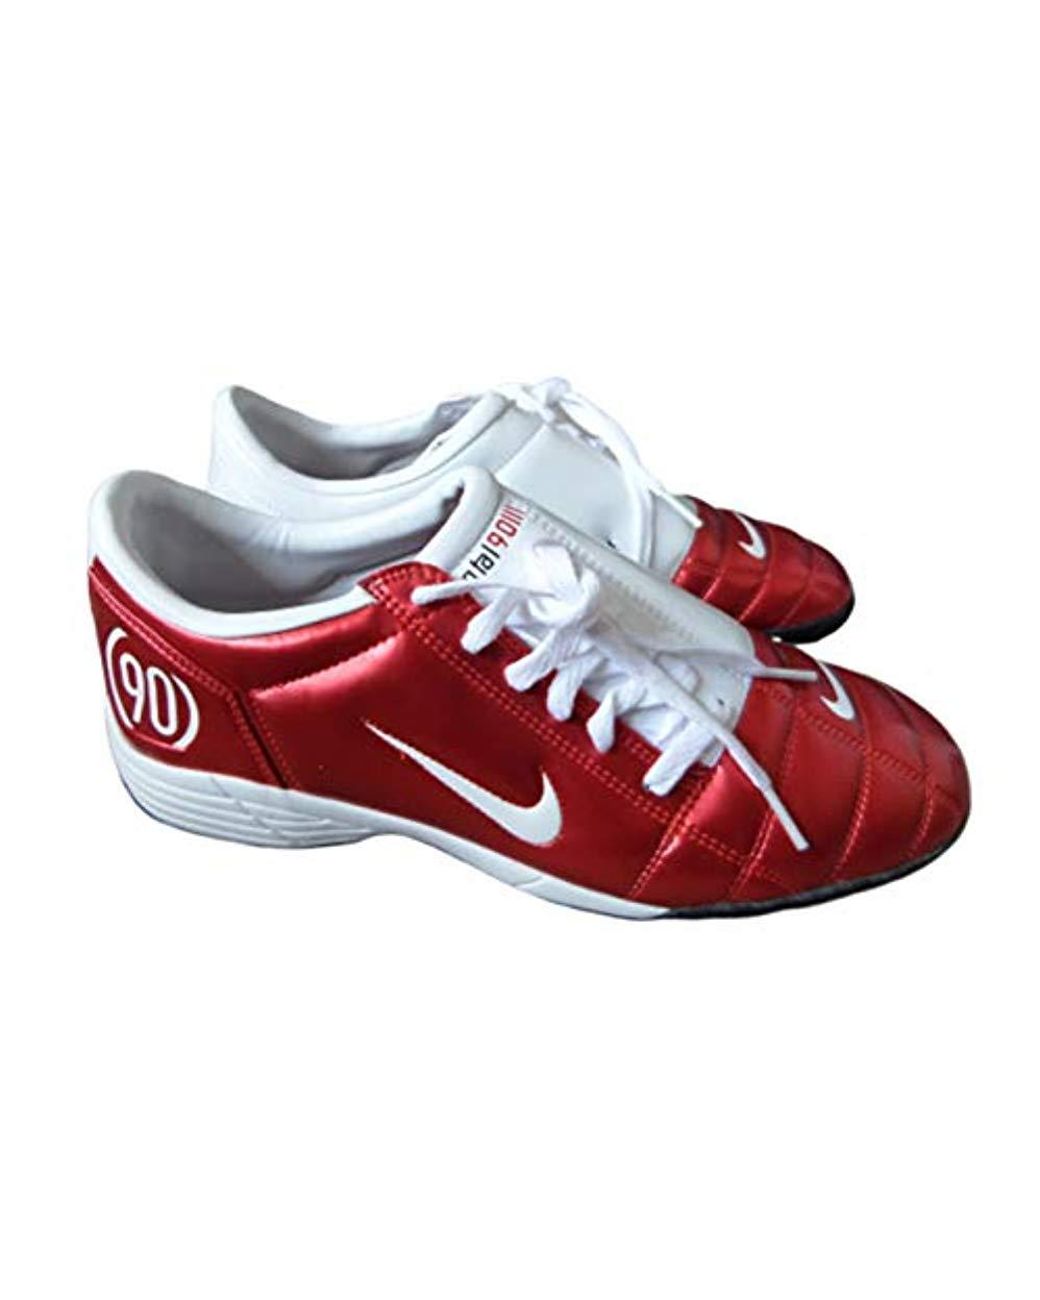 Nike Total 90 Iii Tf Plus Astro Turf Football Trainers Original 2005 Model  In Box Soccer Shoes Uk 10.5, Eur 45.5 in Red for Men | Lyst UK